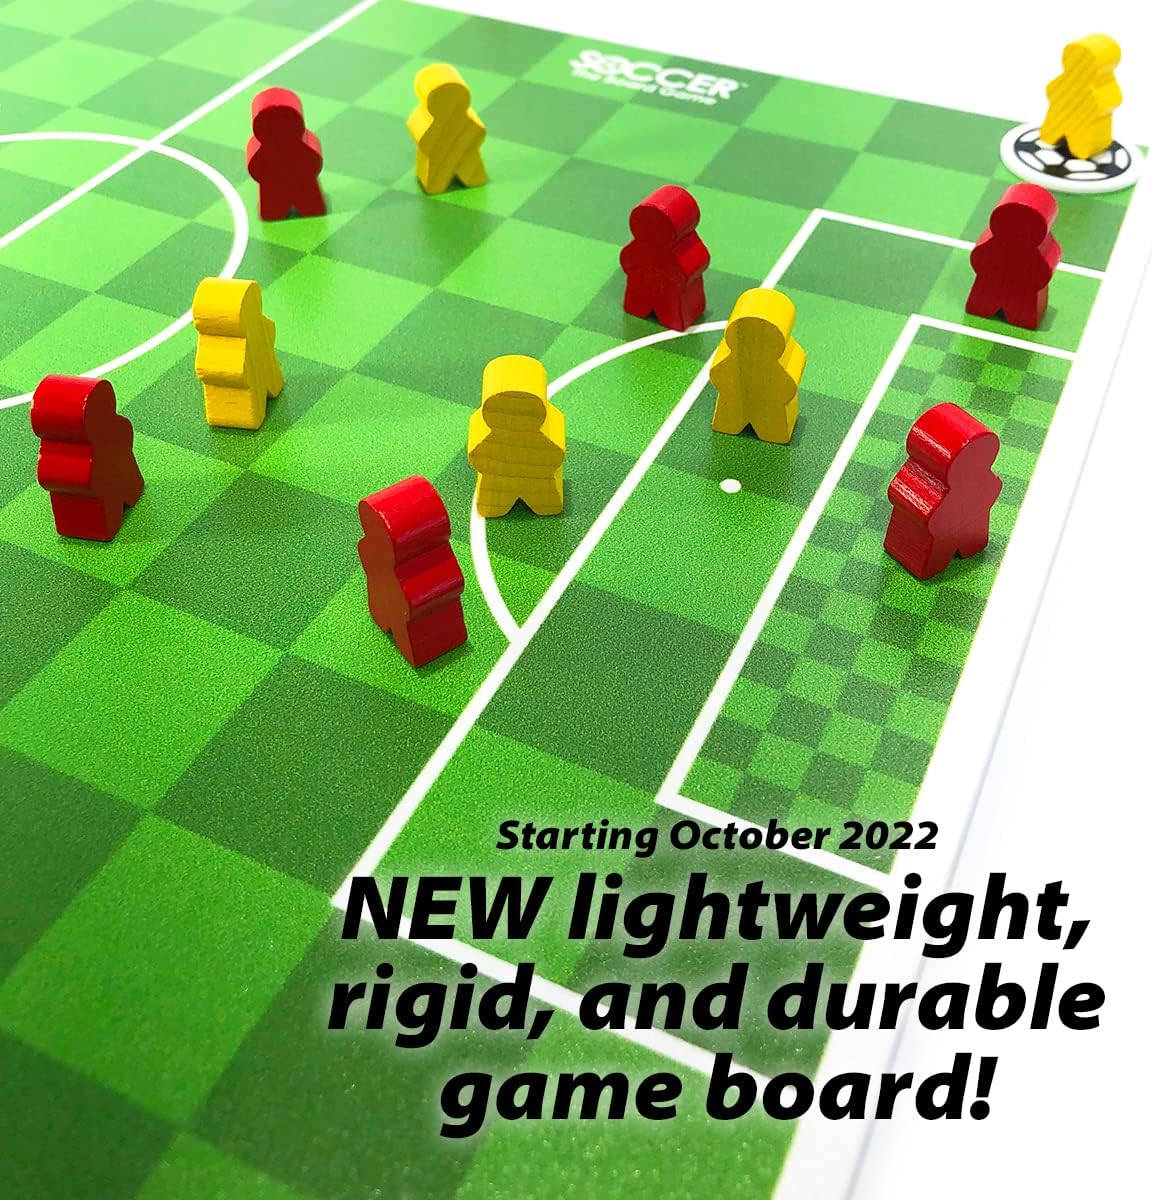 Soccer The Board Game – 2 Player Fast-Paced Soccer Game – Great Gift for Your Soccer Enthusiast